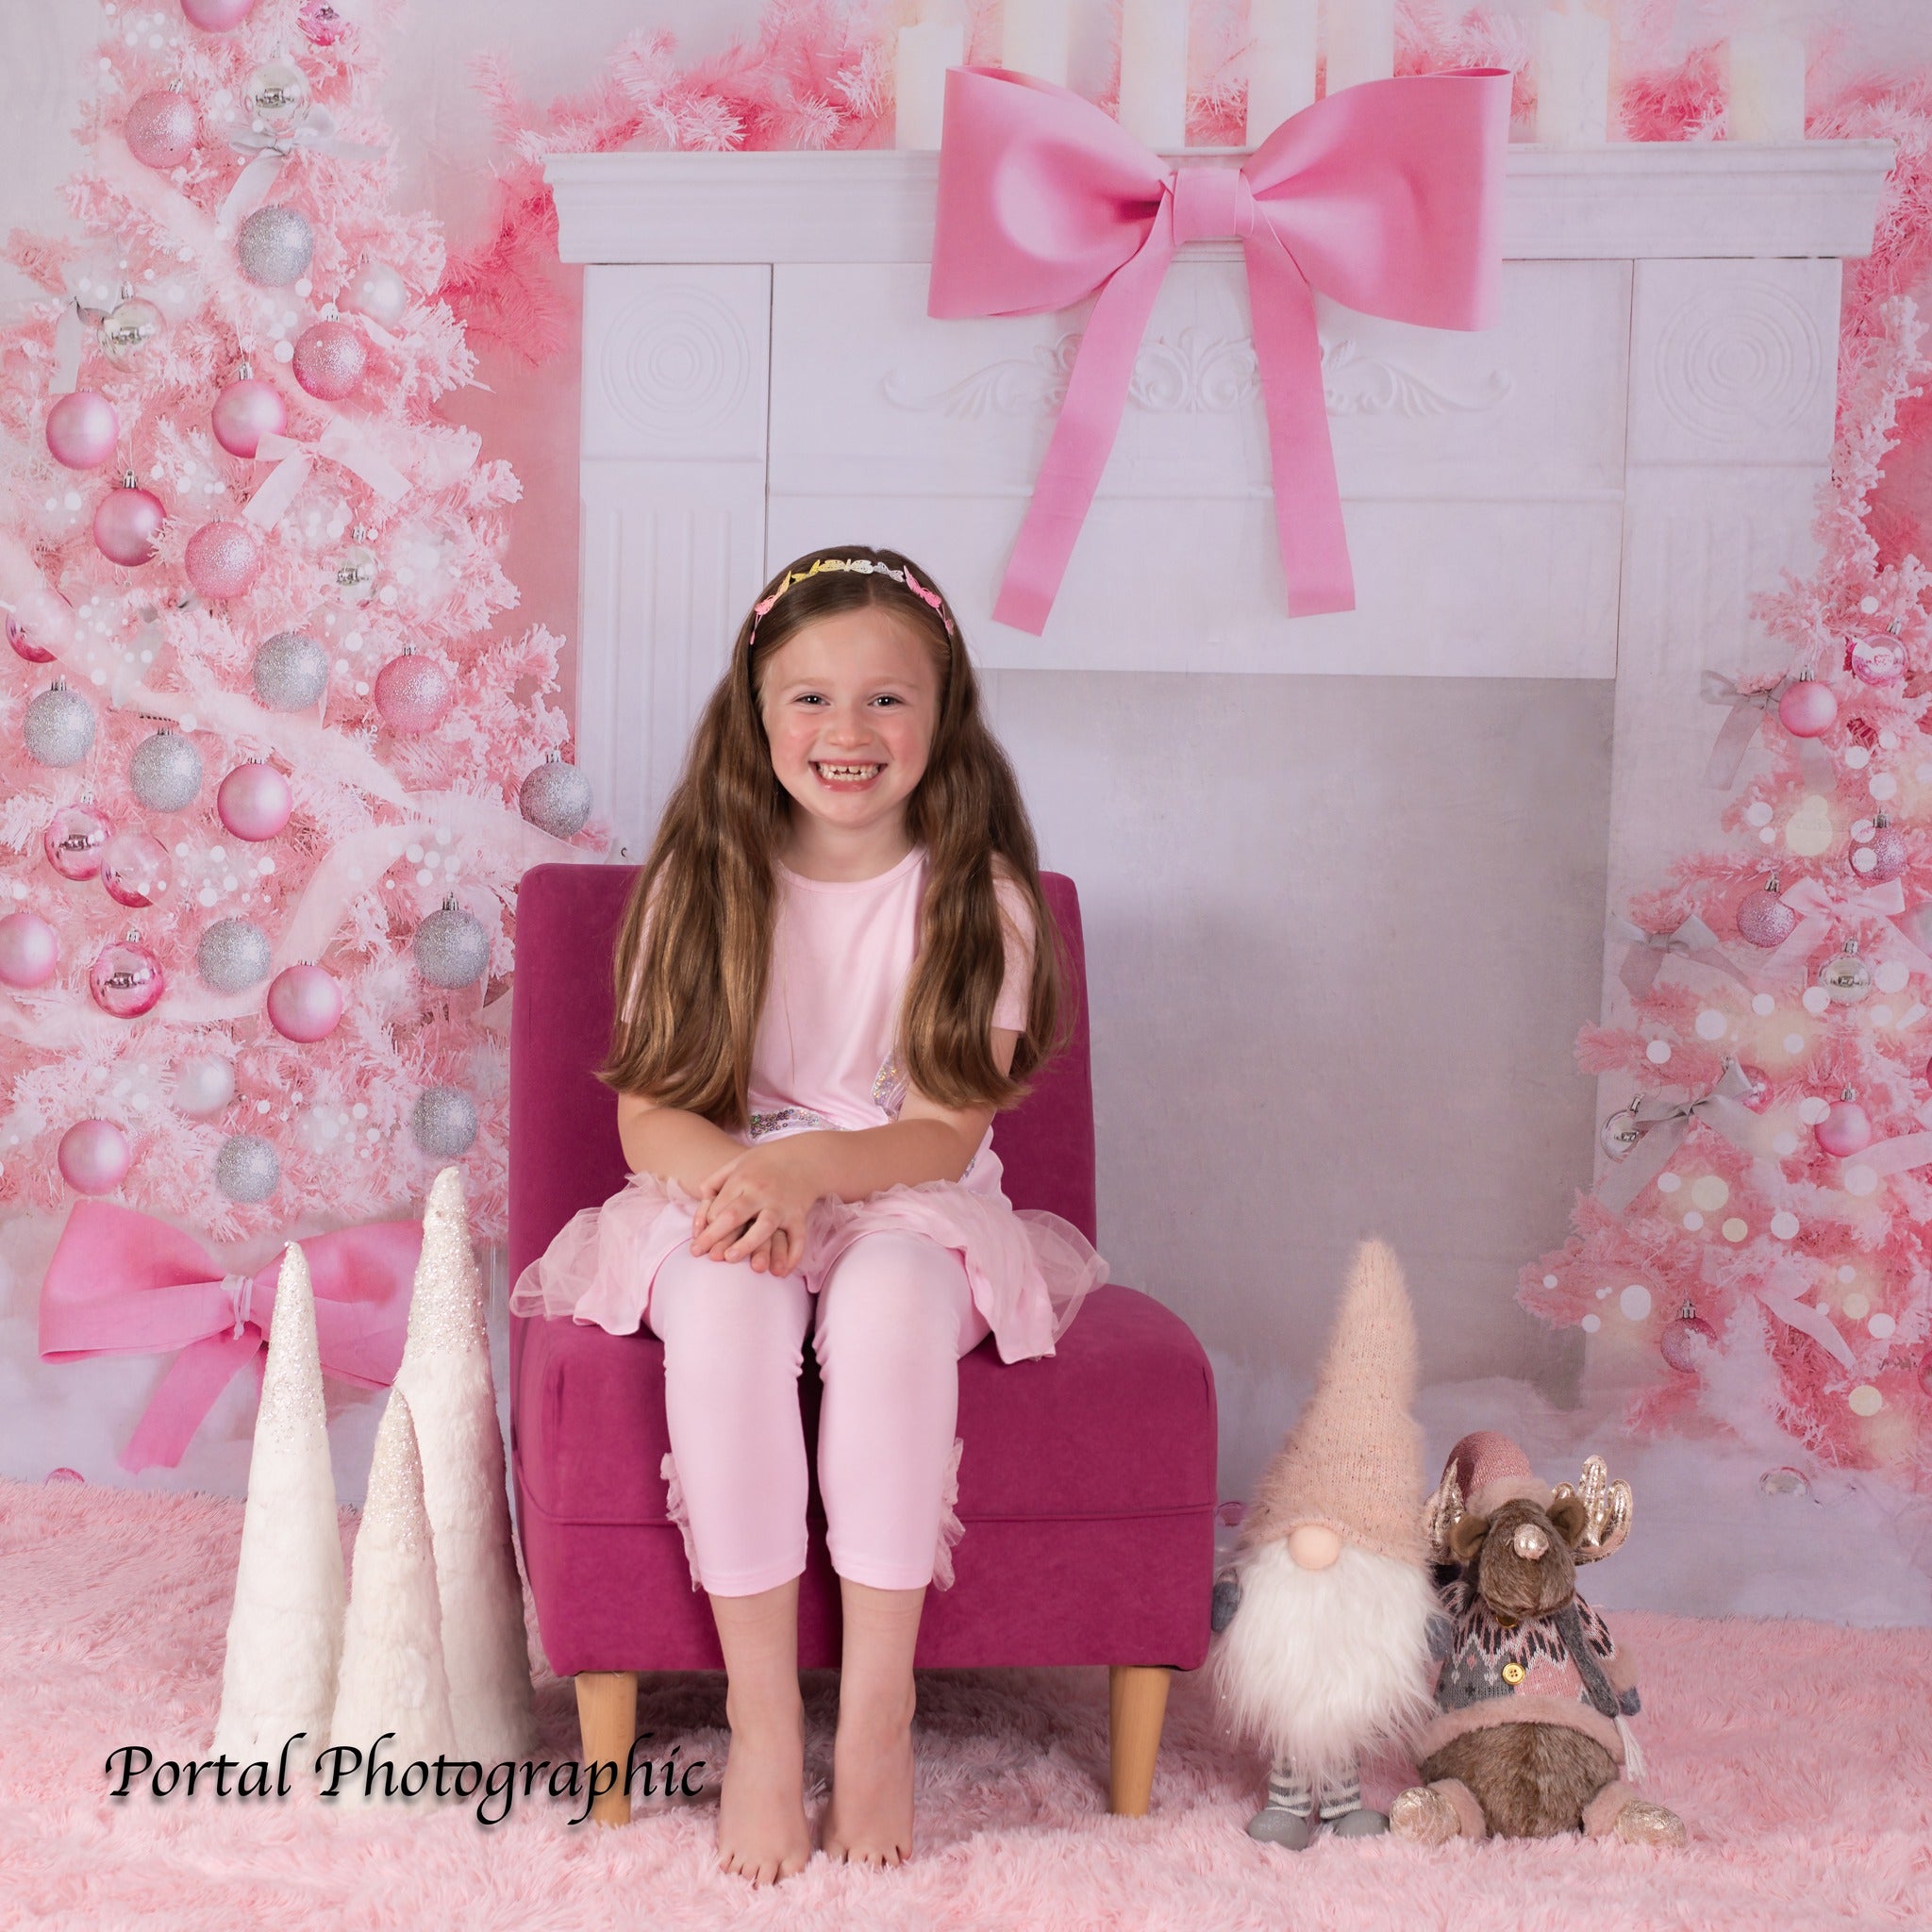 Kate Pink Christmas Tree Backdrop Fireplace Designed by Emetselch